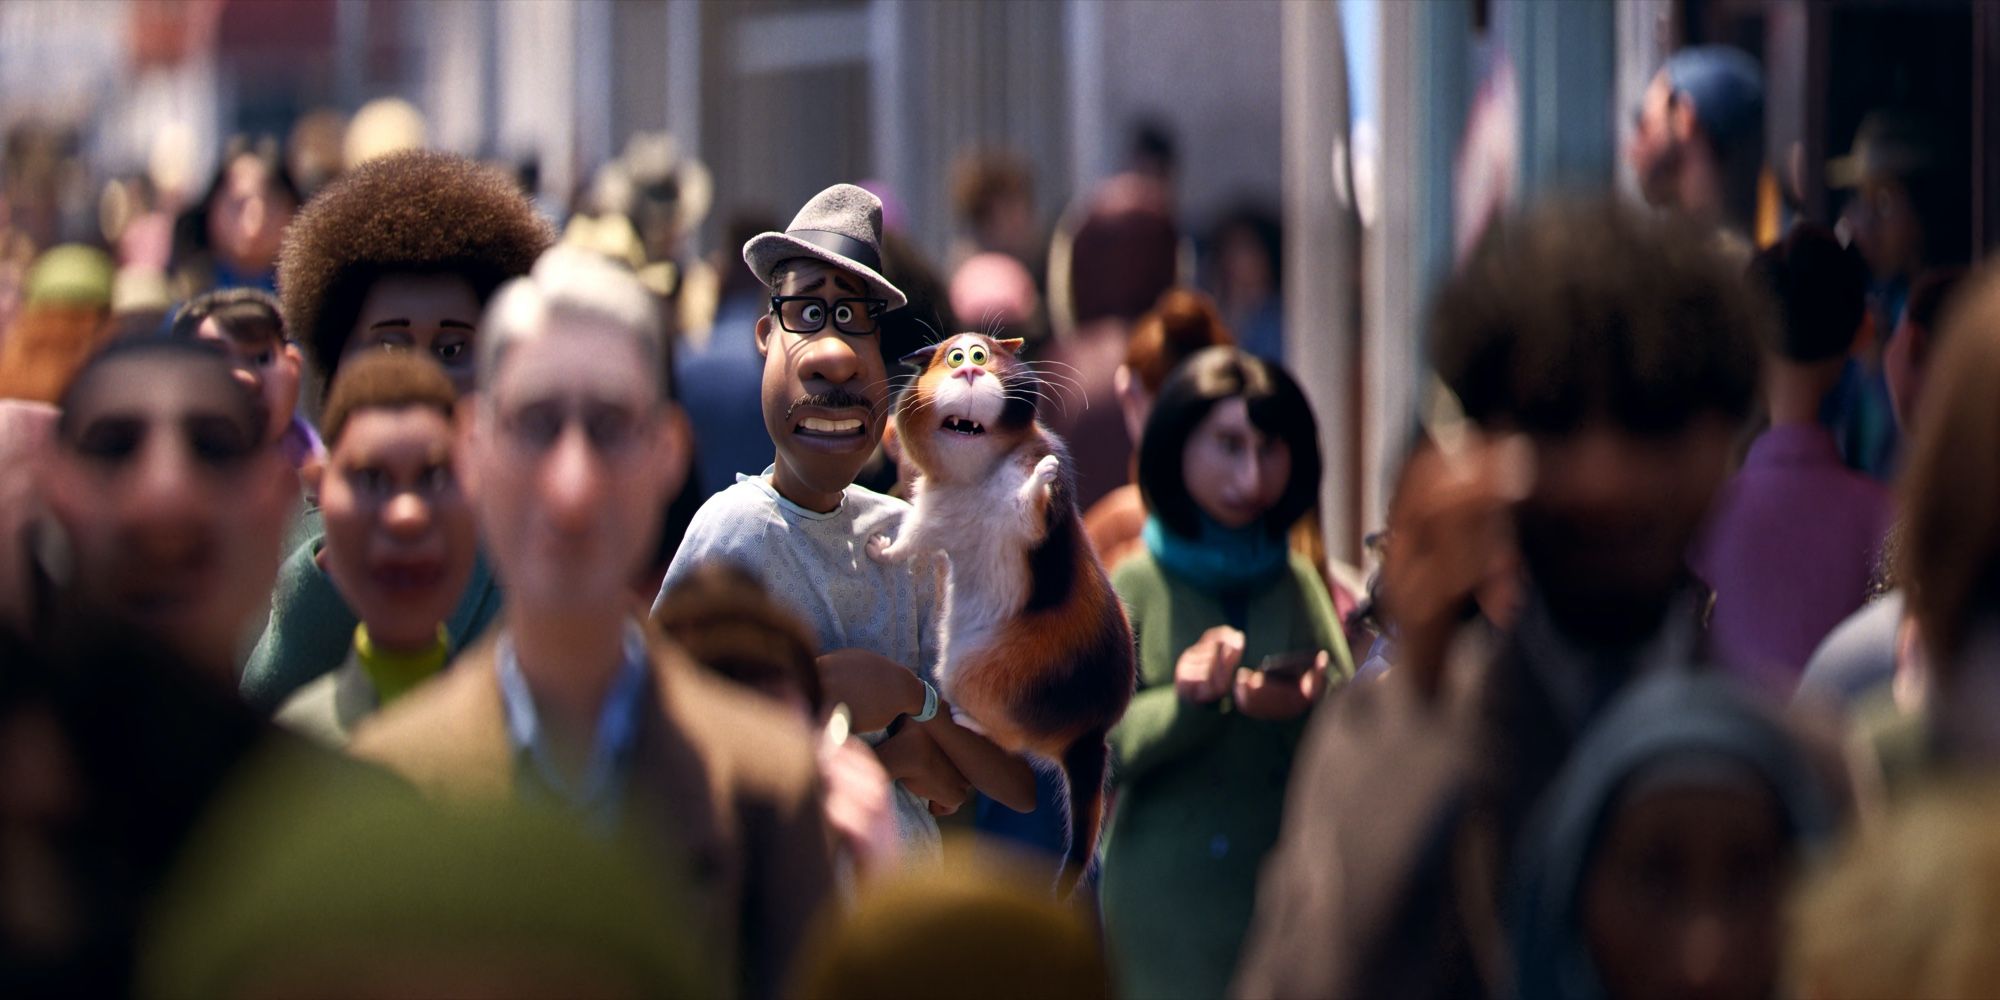 Pixar’s Soul Made History (But Still Has One Big Racial Issue)